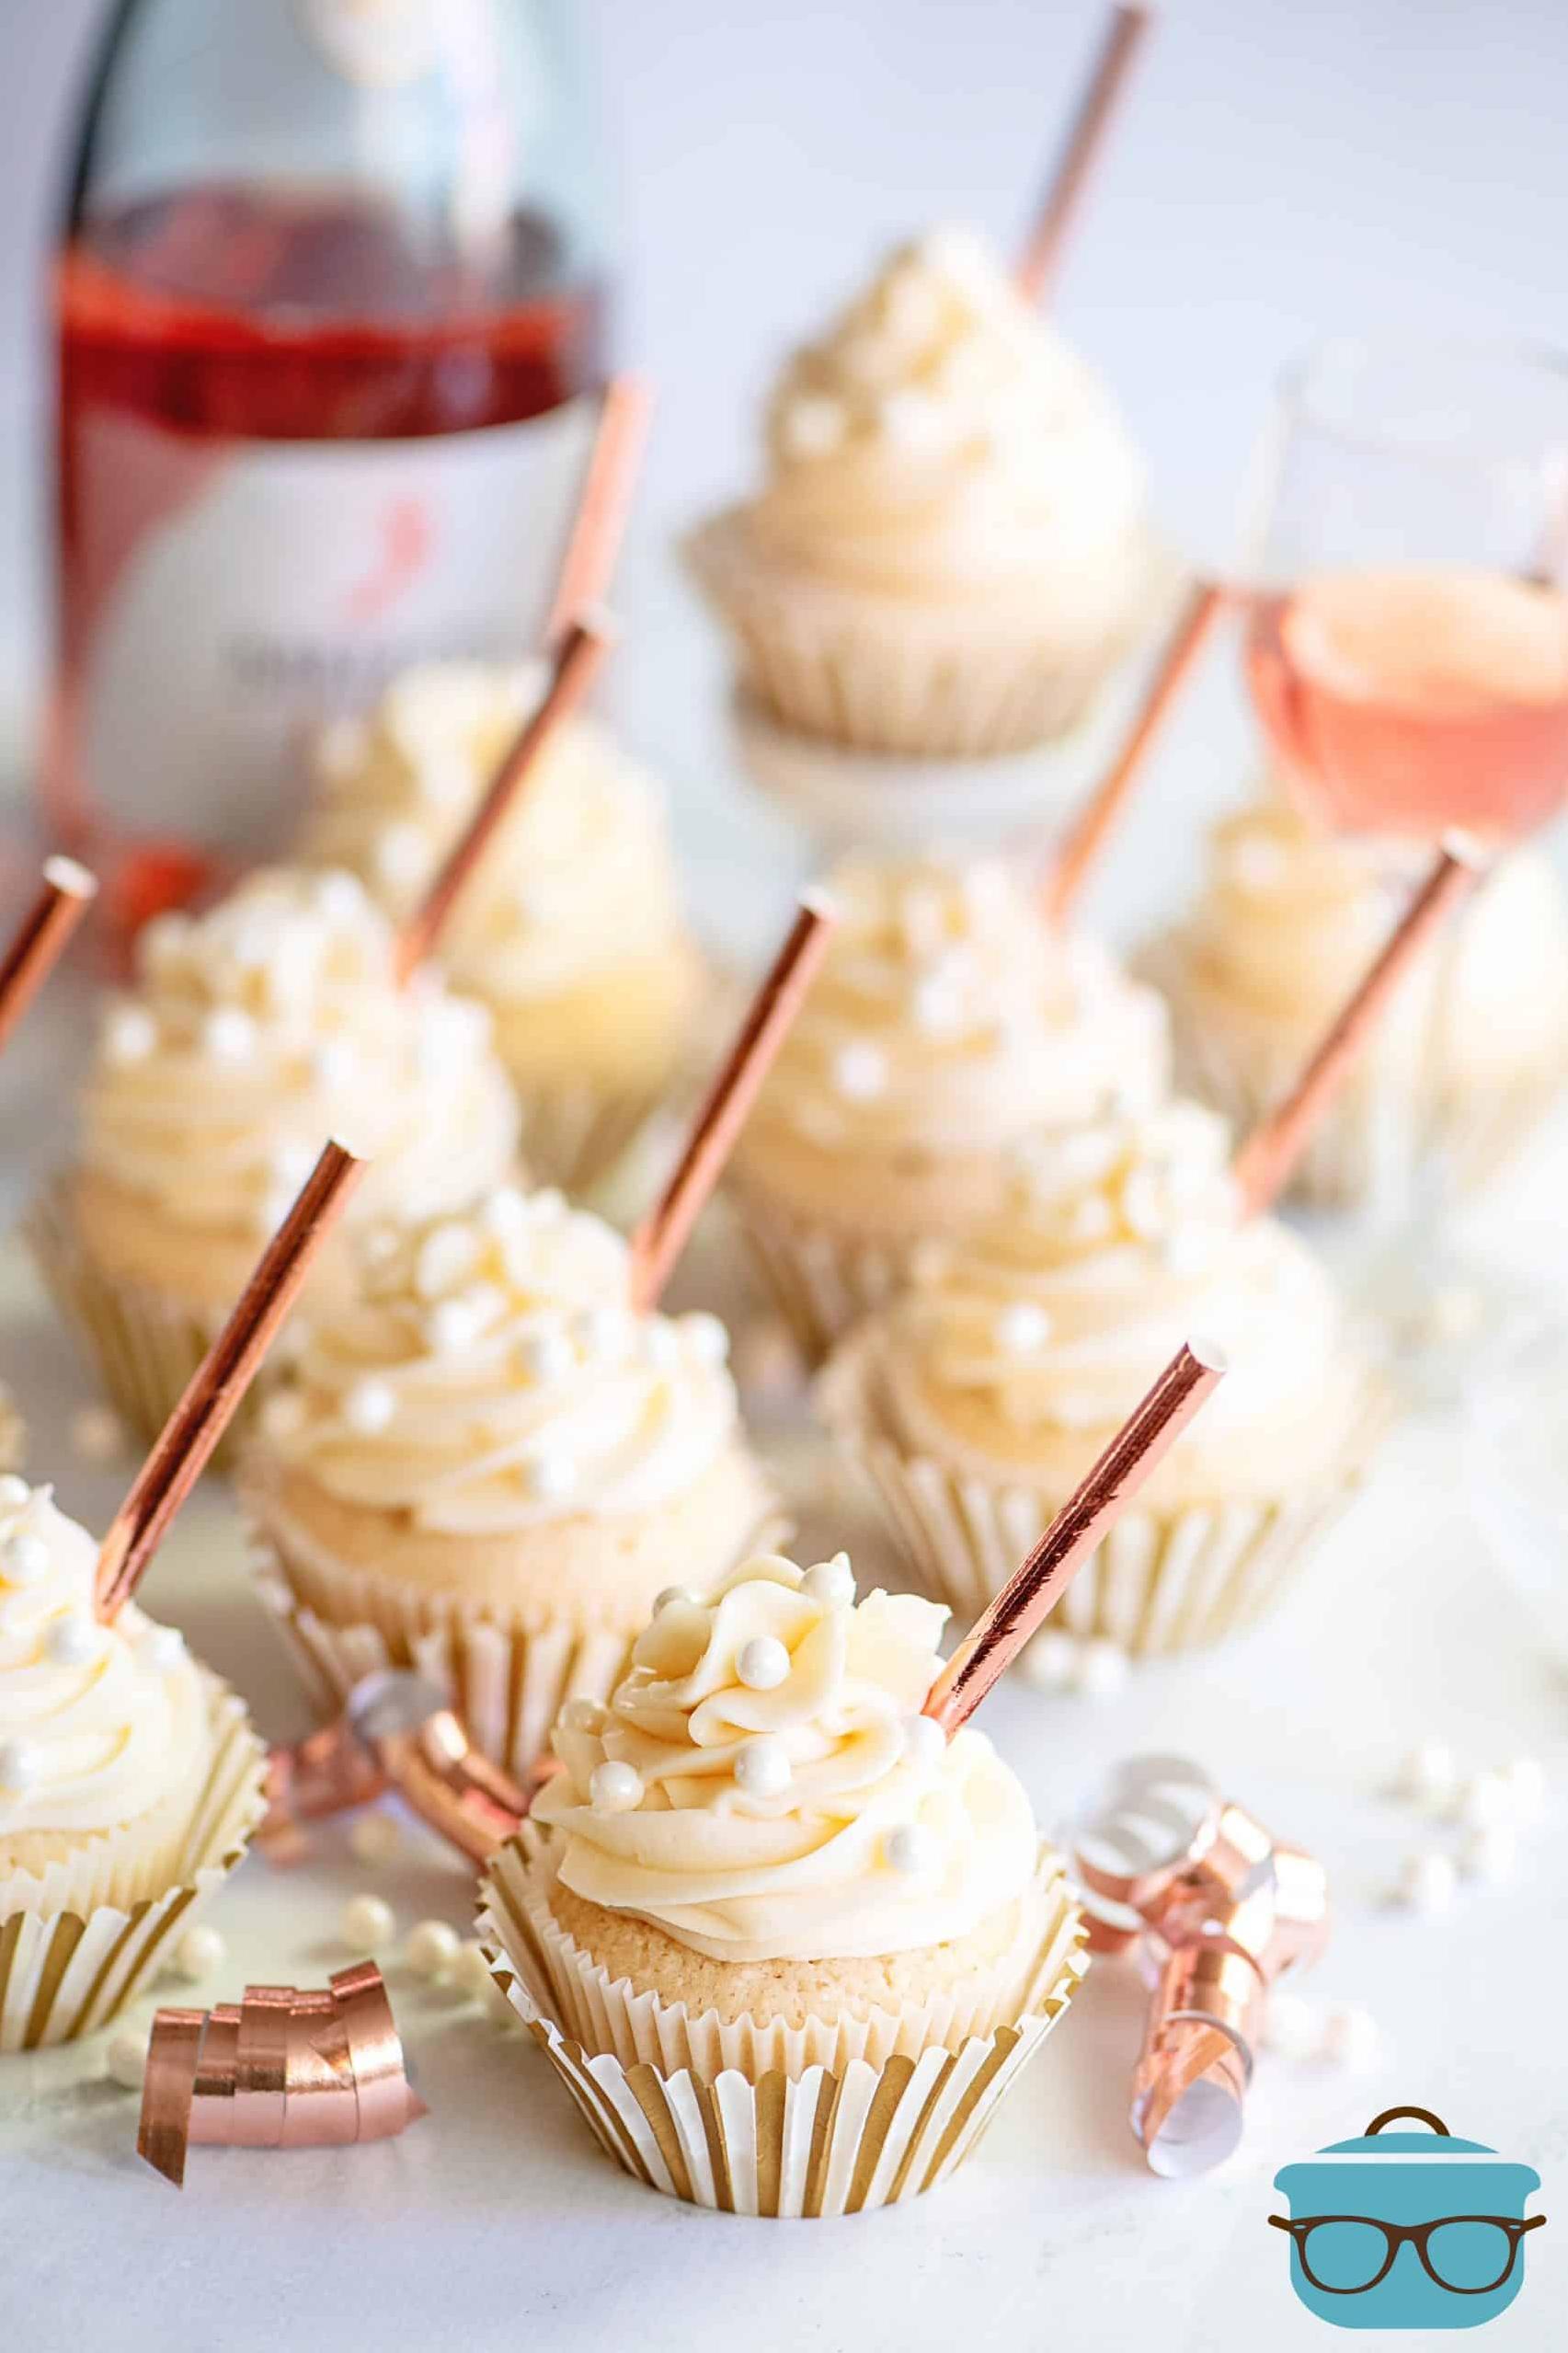  Trust me, Champagne makes everything better - even cupcakes.